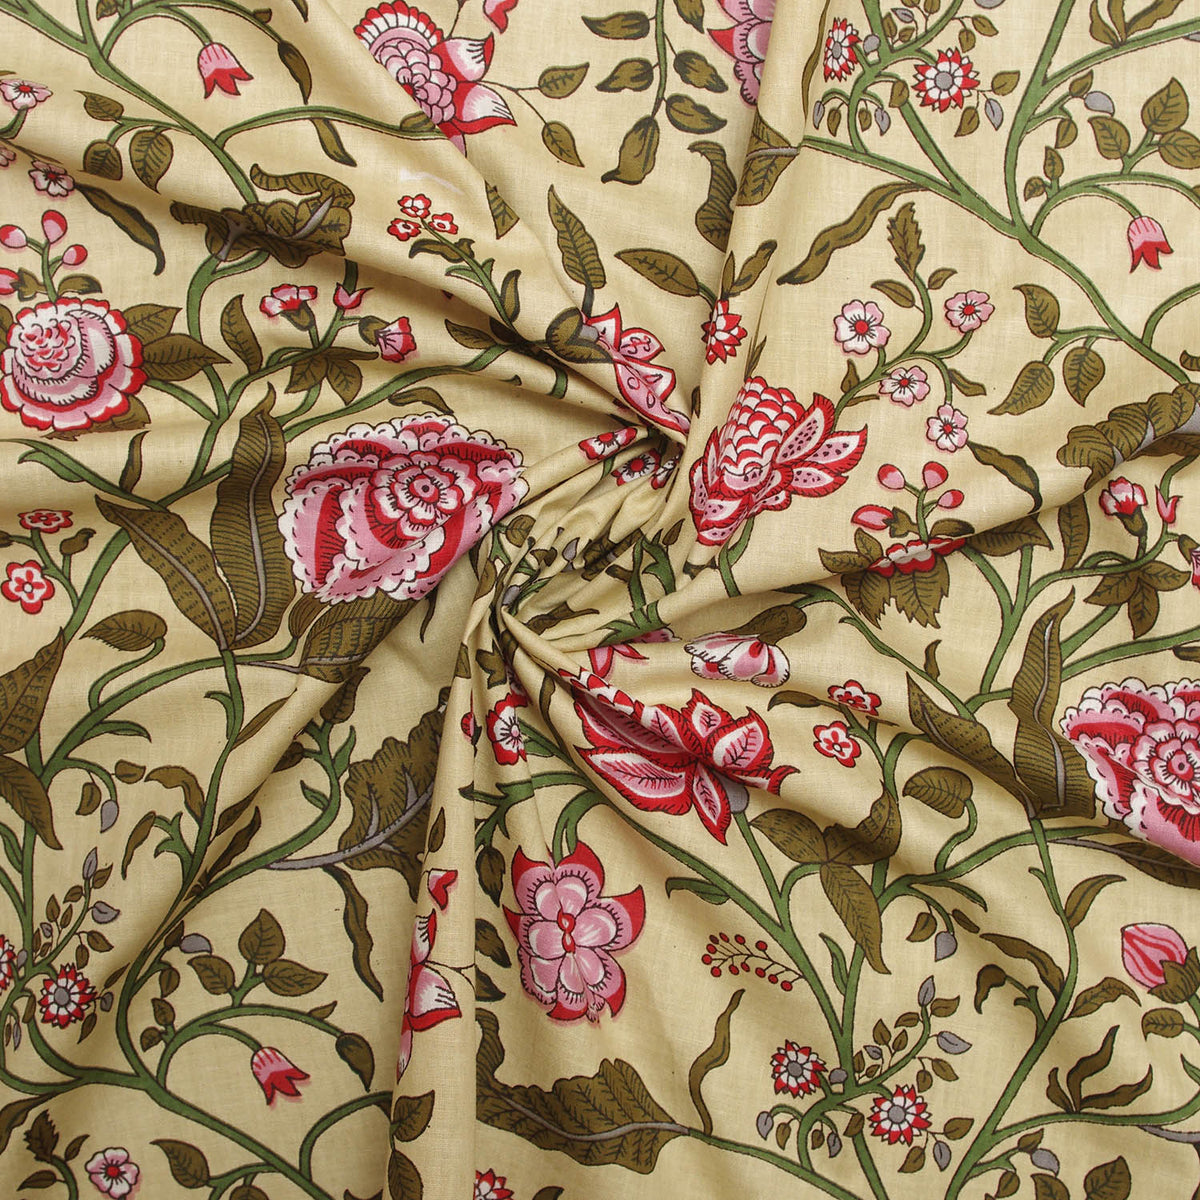 Hand Screen Printed Beige With Red Floral Print 100% Cotton Women Dress Fabric Design 220